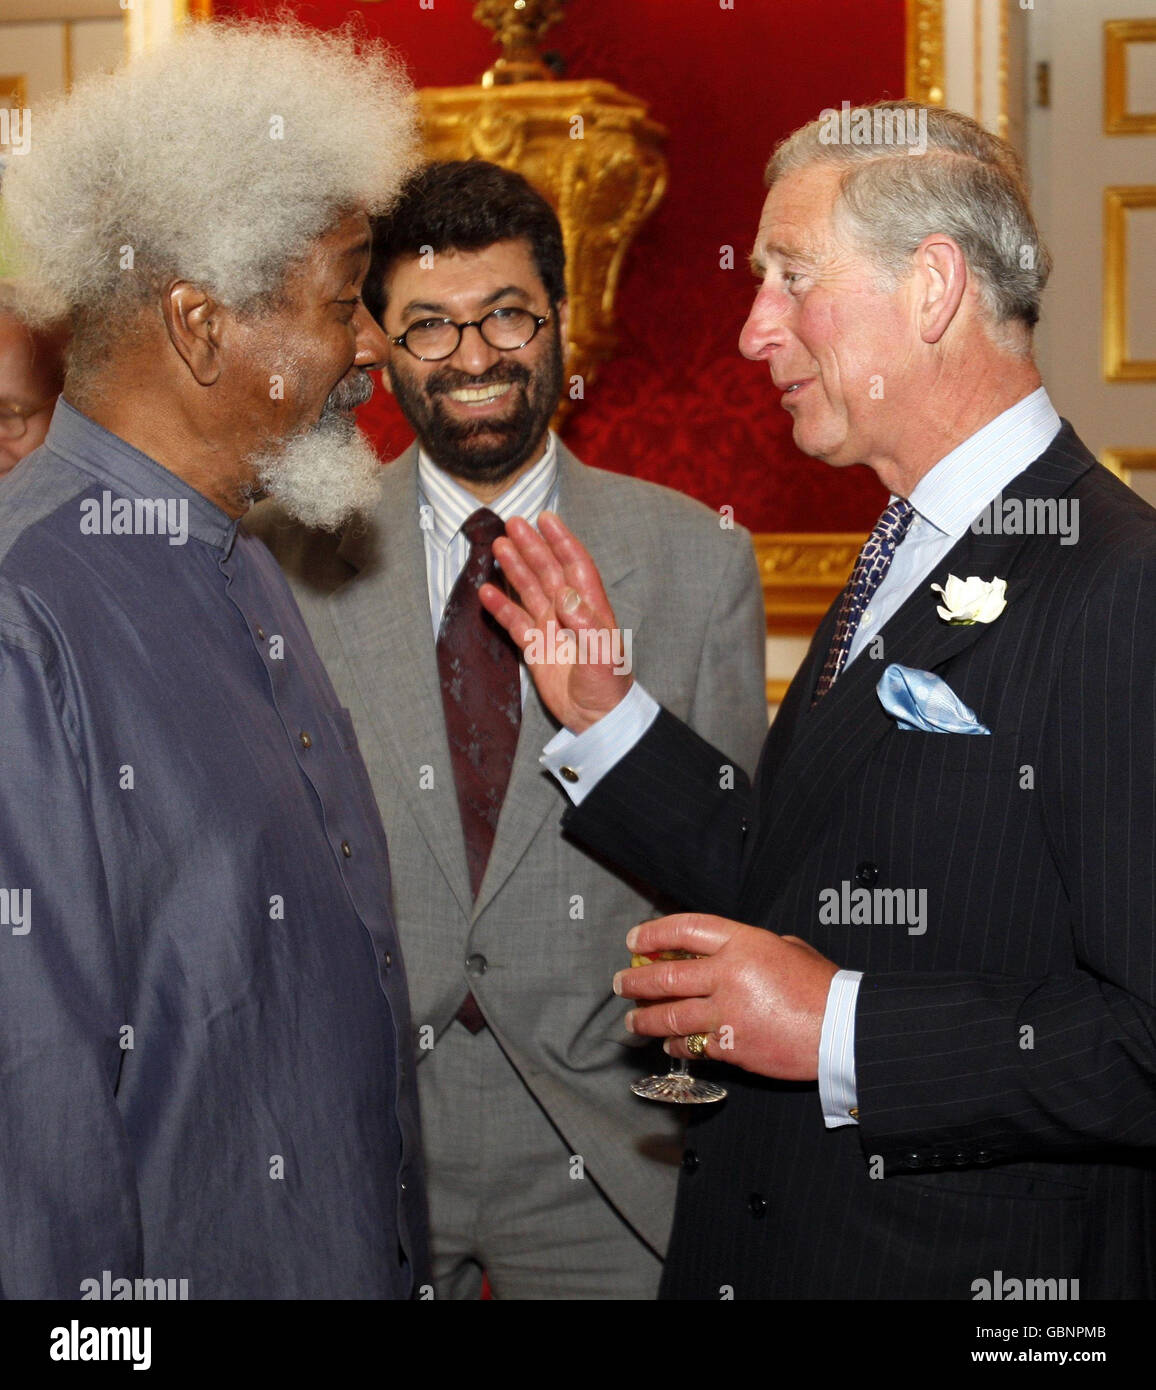 The Prince of Wales, right, Patron of the University of Cambridge Programme for Sustainability Leadership, talks to Professor Wole Soyinka, the 1986 winner of the Nobel Prize in Literature, left, and and Dr Tariq Banuri, centre, who heads the United Nations division for Sustainable Development, during a reception for Nobel Laureates and climate change experts at St James's Palace in London. Stock Photo